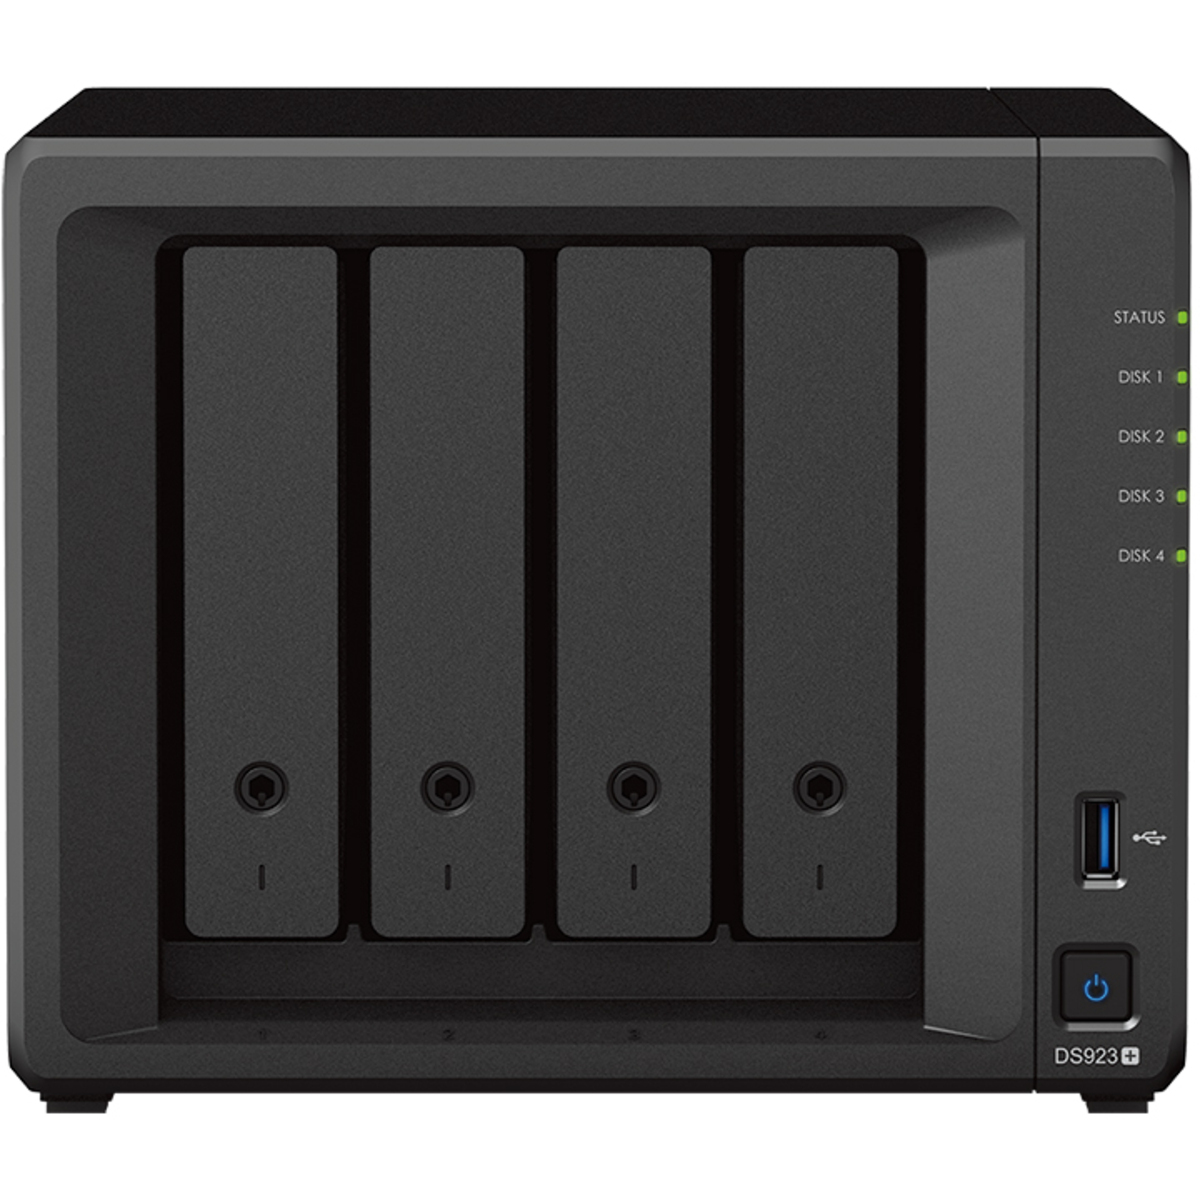 buy Synology DiskStation DS923+ Desktop NAS - Network Attached Storage Device Burn-In Tested Configurations - nas headquarters buy network attached storage server device das new raid-5 free shipping usa DiskStation DS923+